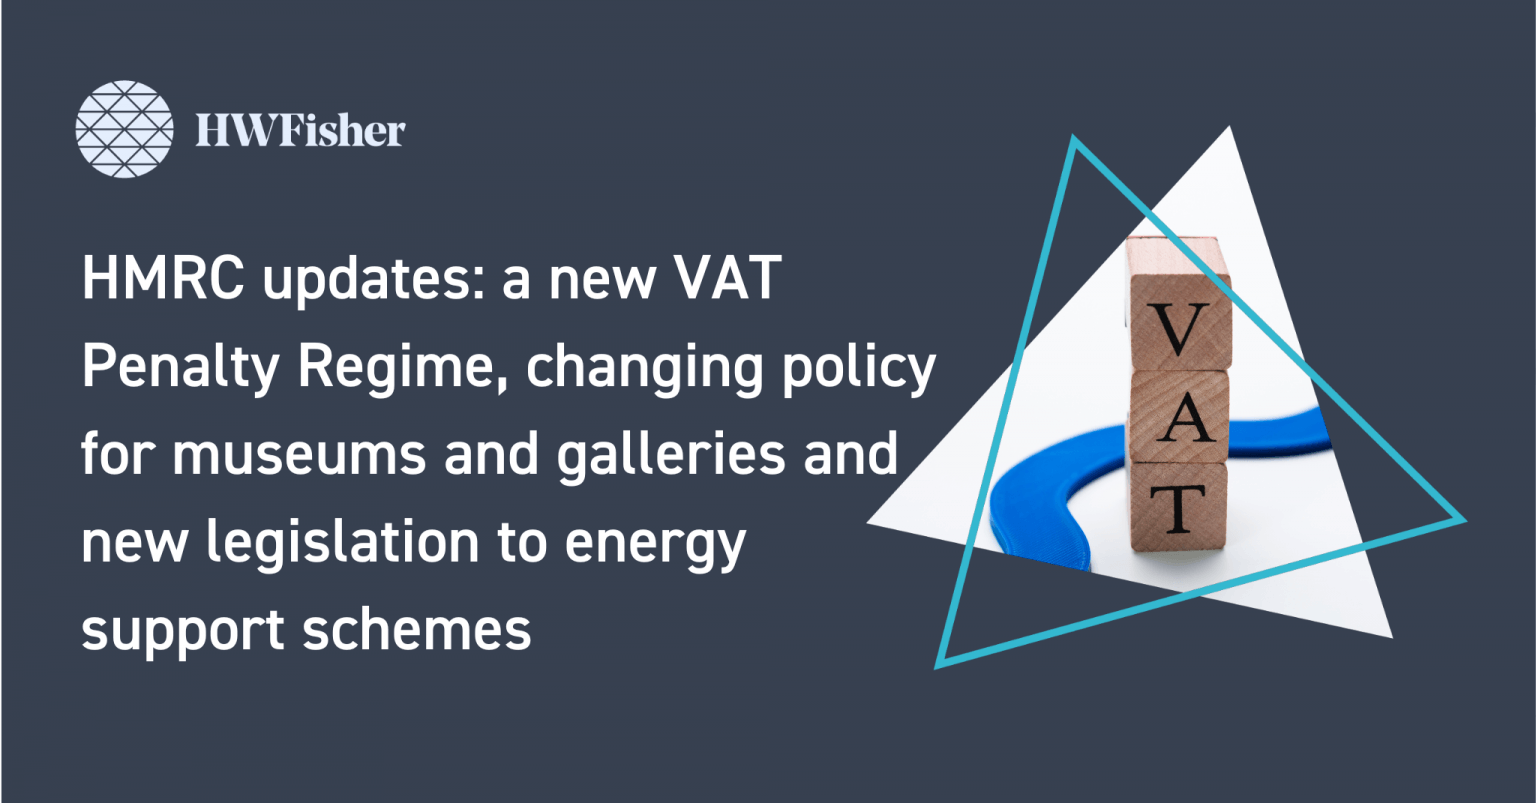 HMRC updates a new VAT Penalty Regime, changing policy for museums and